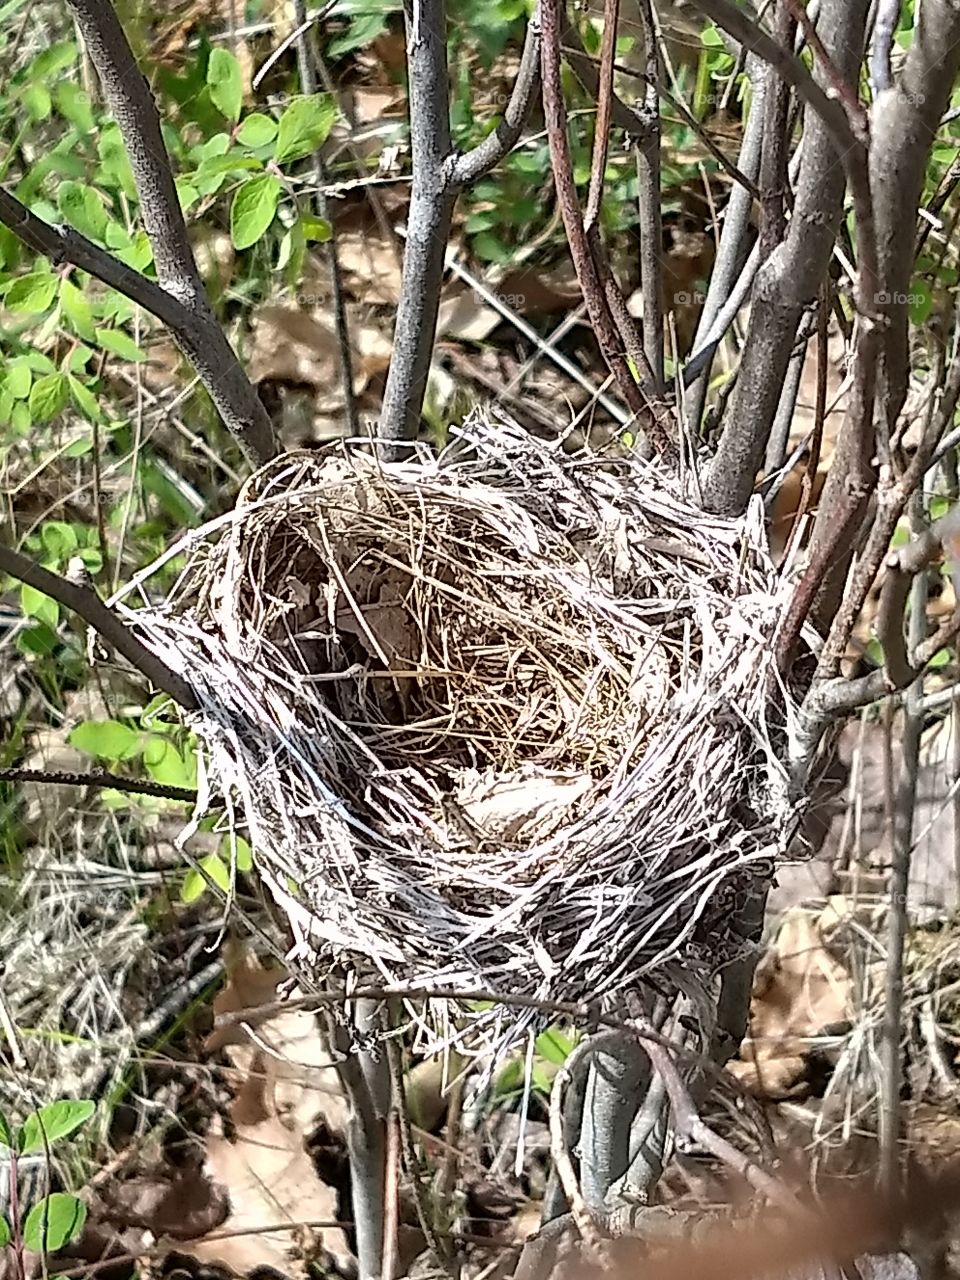 A tiny bird's nest in the brush along a hiking trail in Knob Noster State Park, Missouri.